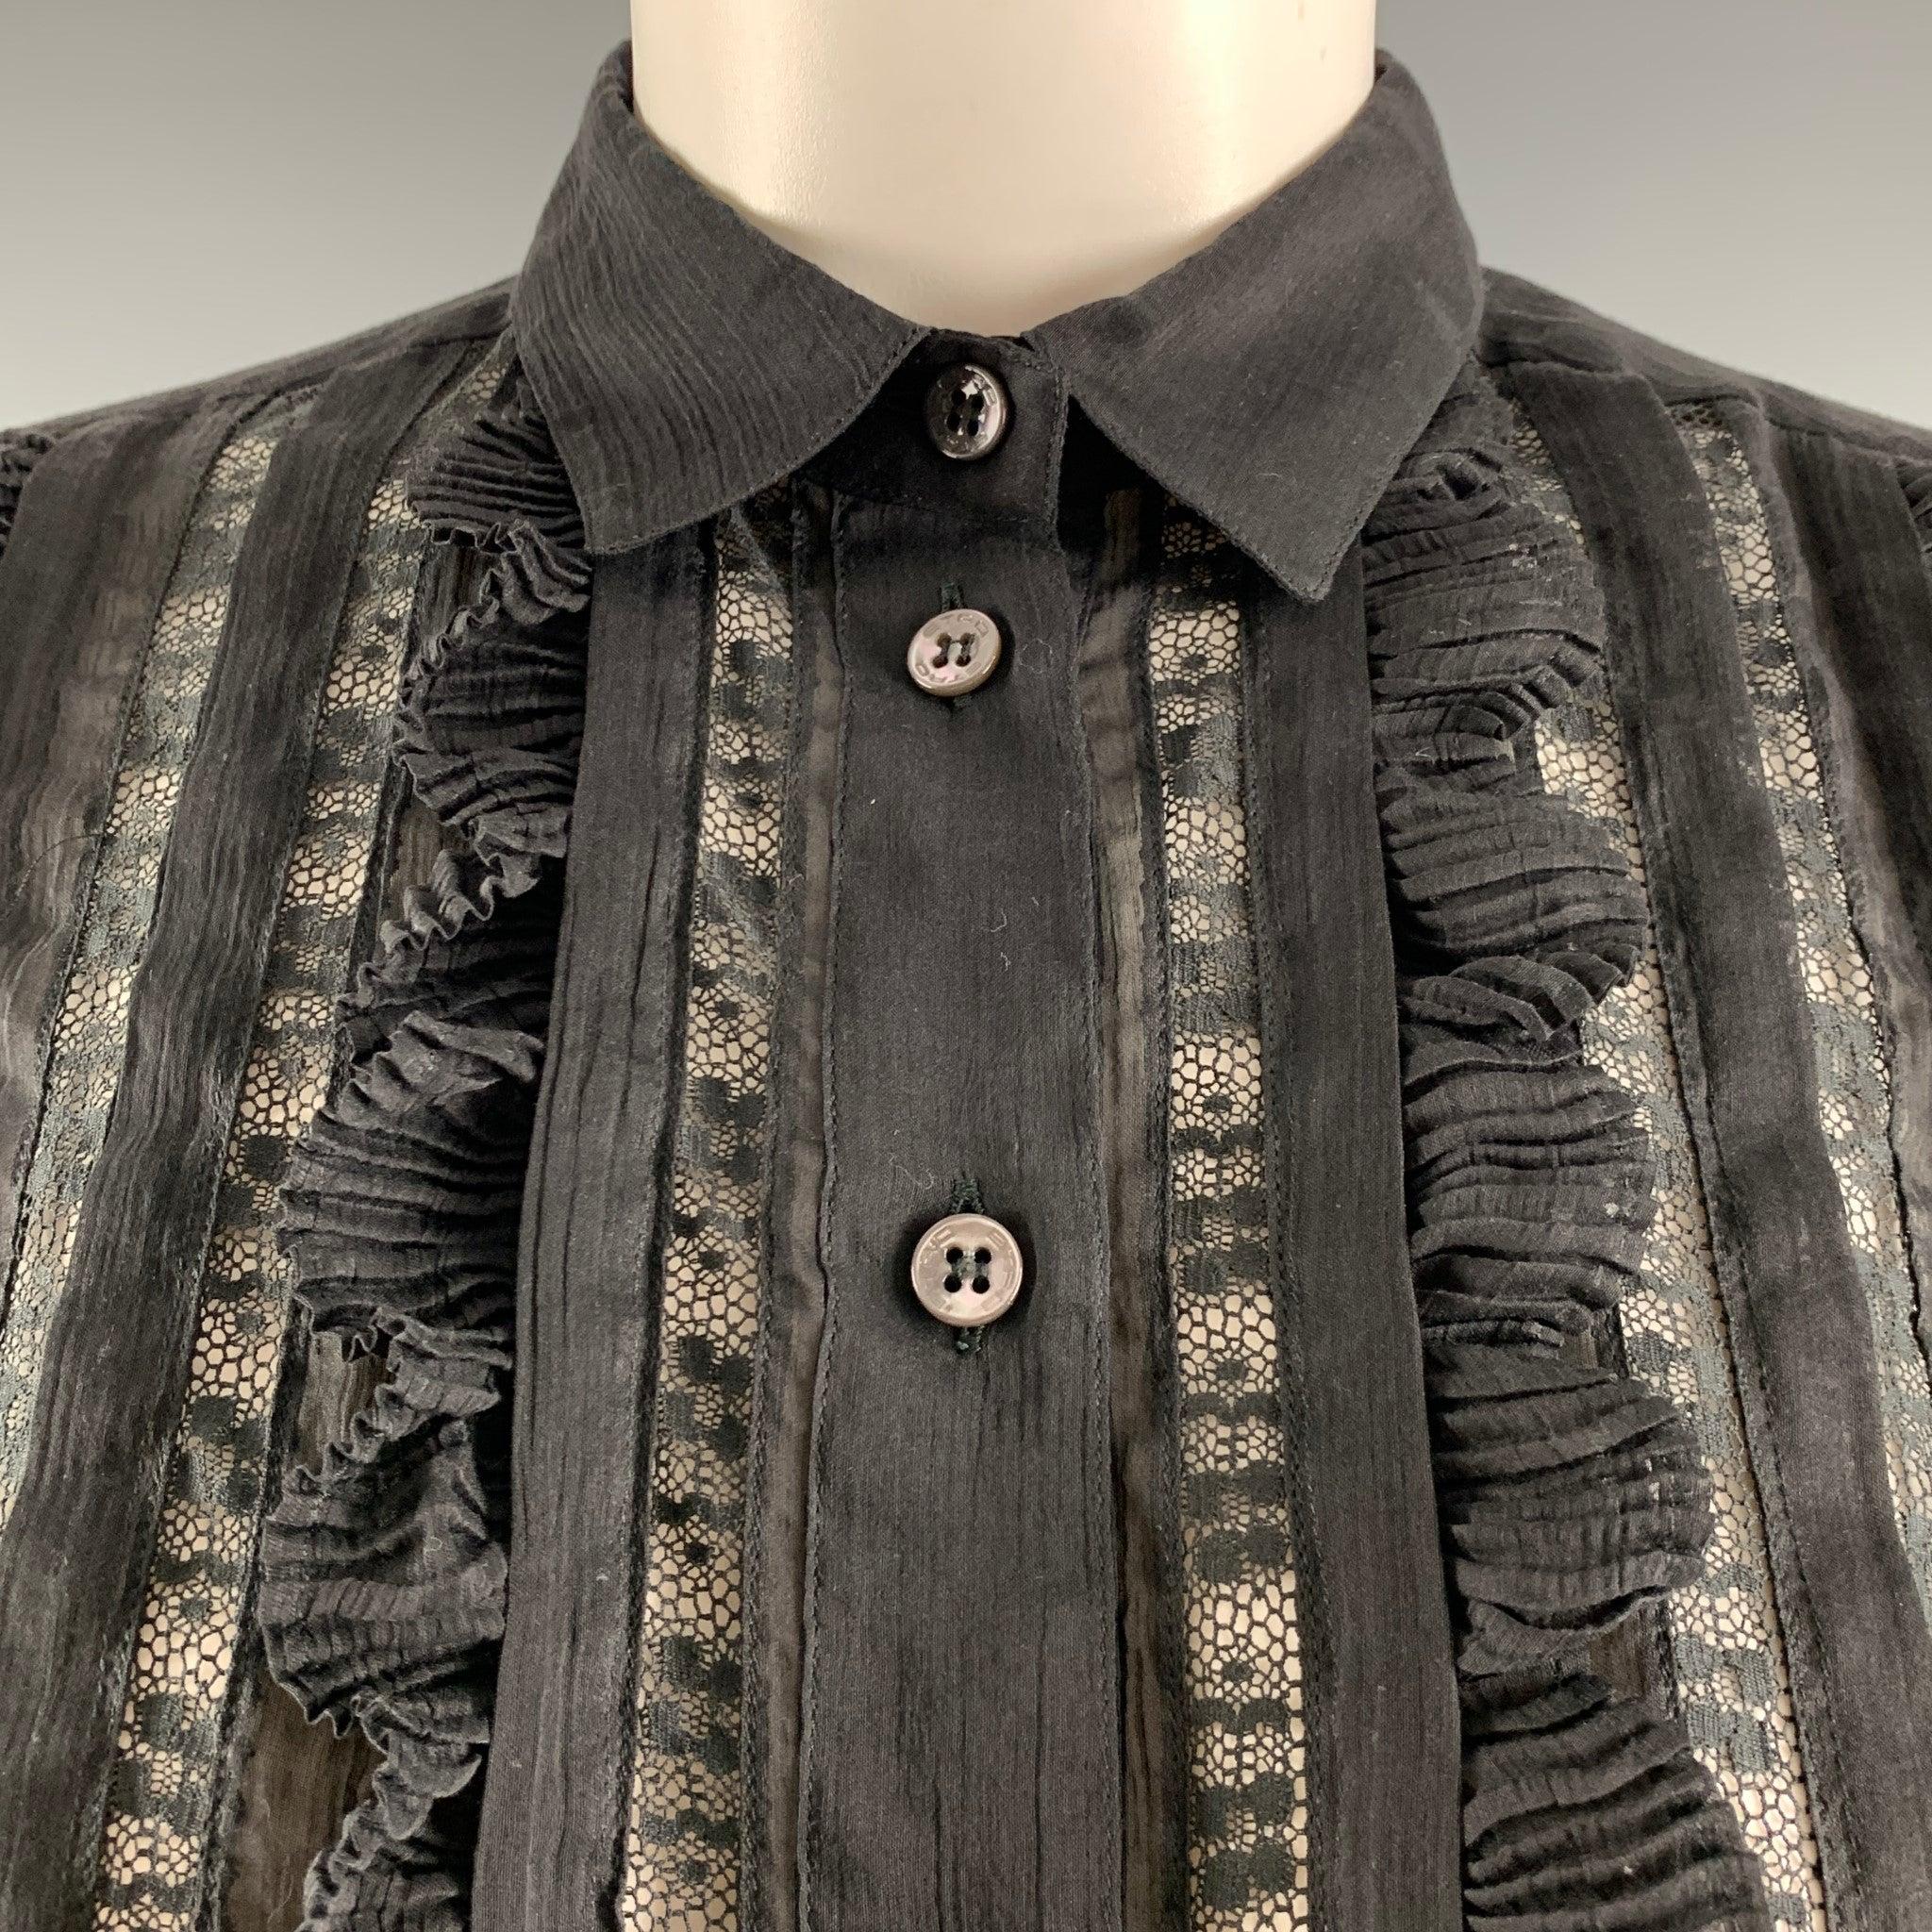 ETRO shirt comes in a black cotton and silk woven material featuring a lace and pleated accents at front, spread collar, and a button up closure. Made in Italy. Excellent Pre-Owned Condition.  

Marked:   40 

Measurements: 
 
Shoulder: 14.5 inches